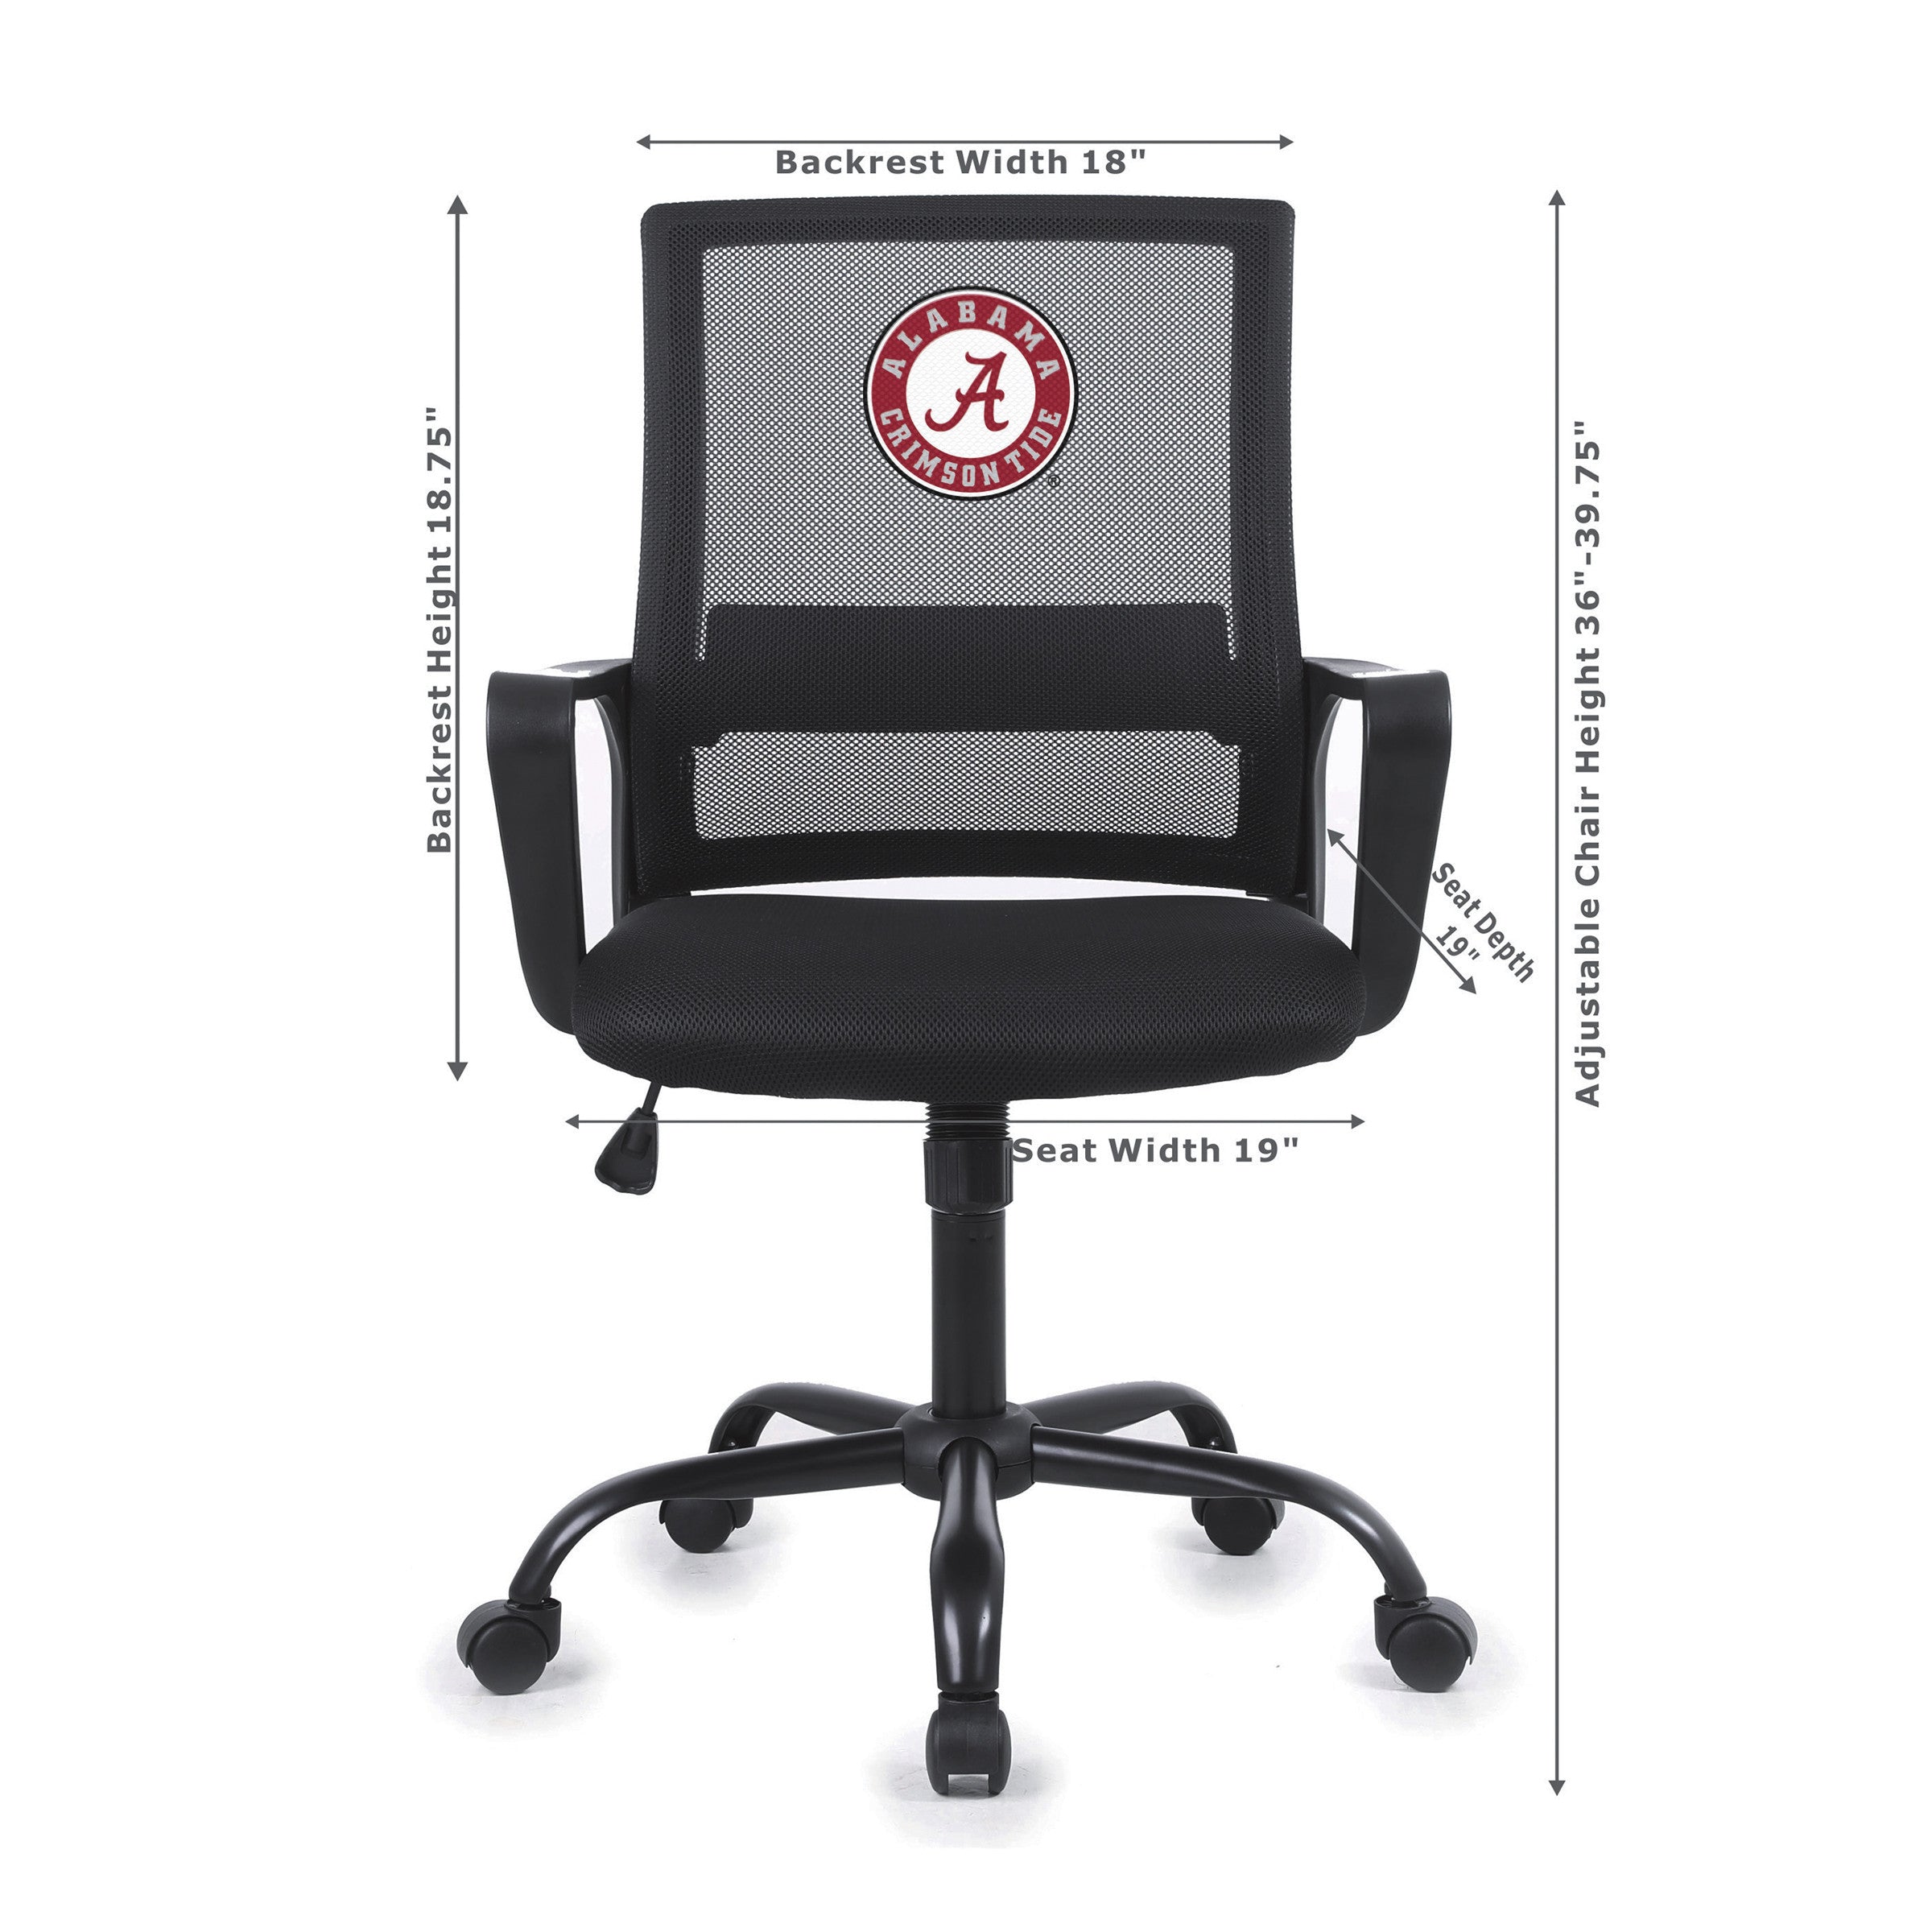 Imperial University of Alabama Task Chair